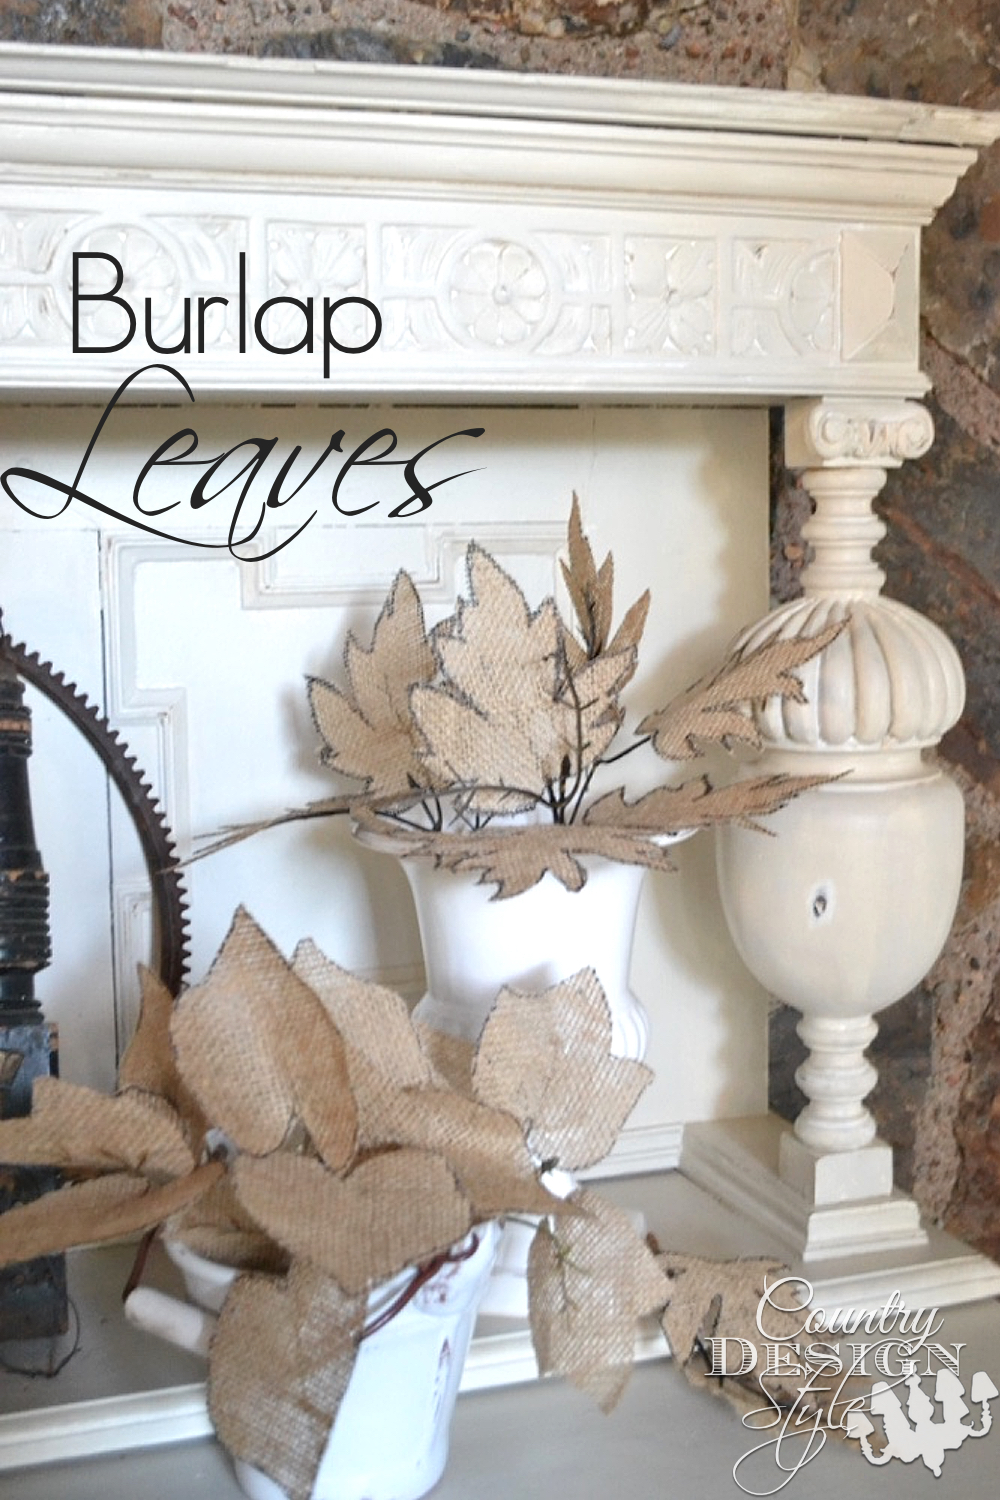 Simple tutorial on making burlap leaves from dollar store fall leaves. Add rustic fall to your living room. Country Design Style www.countrydesignstyle.com